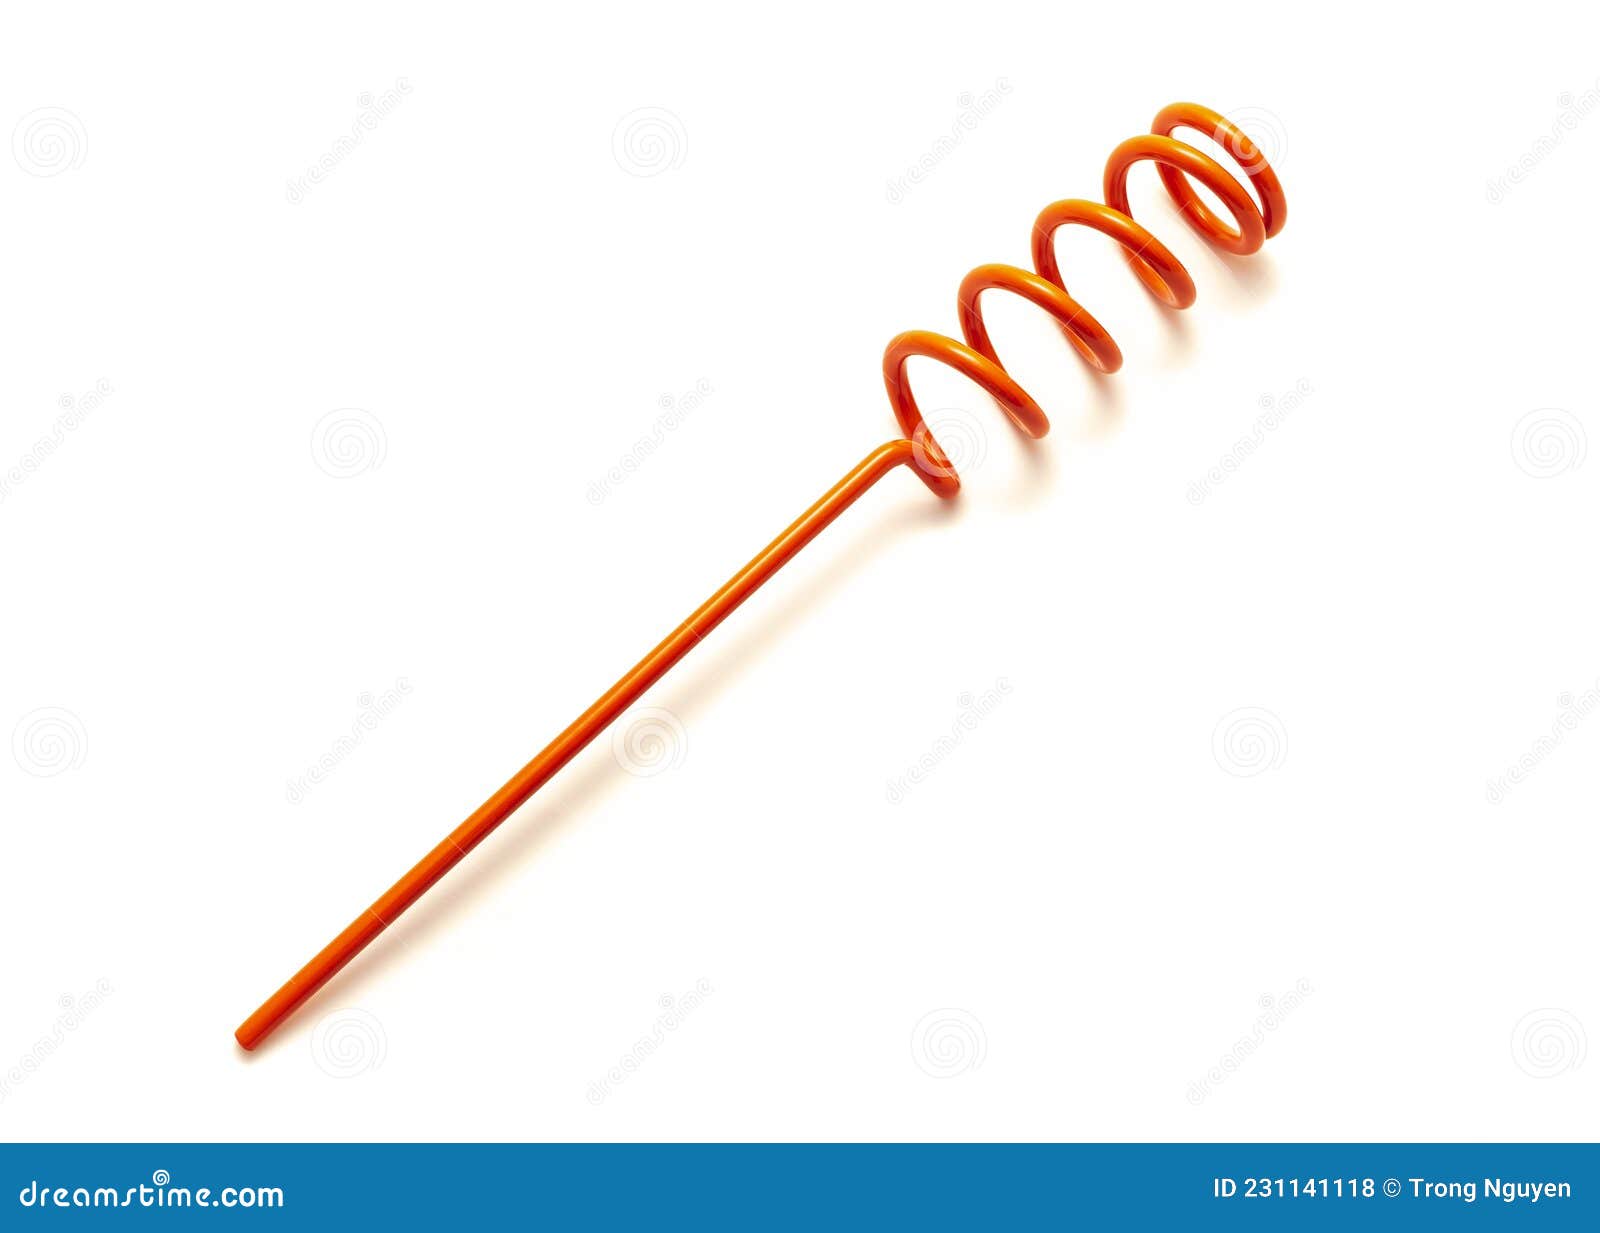 Red Powdered Coated Steel Finish Spiral Rod Pole Holder Bank Fishing Gear  Isolated on White Stock Photo - Image of hobby, clipping: 231141118